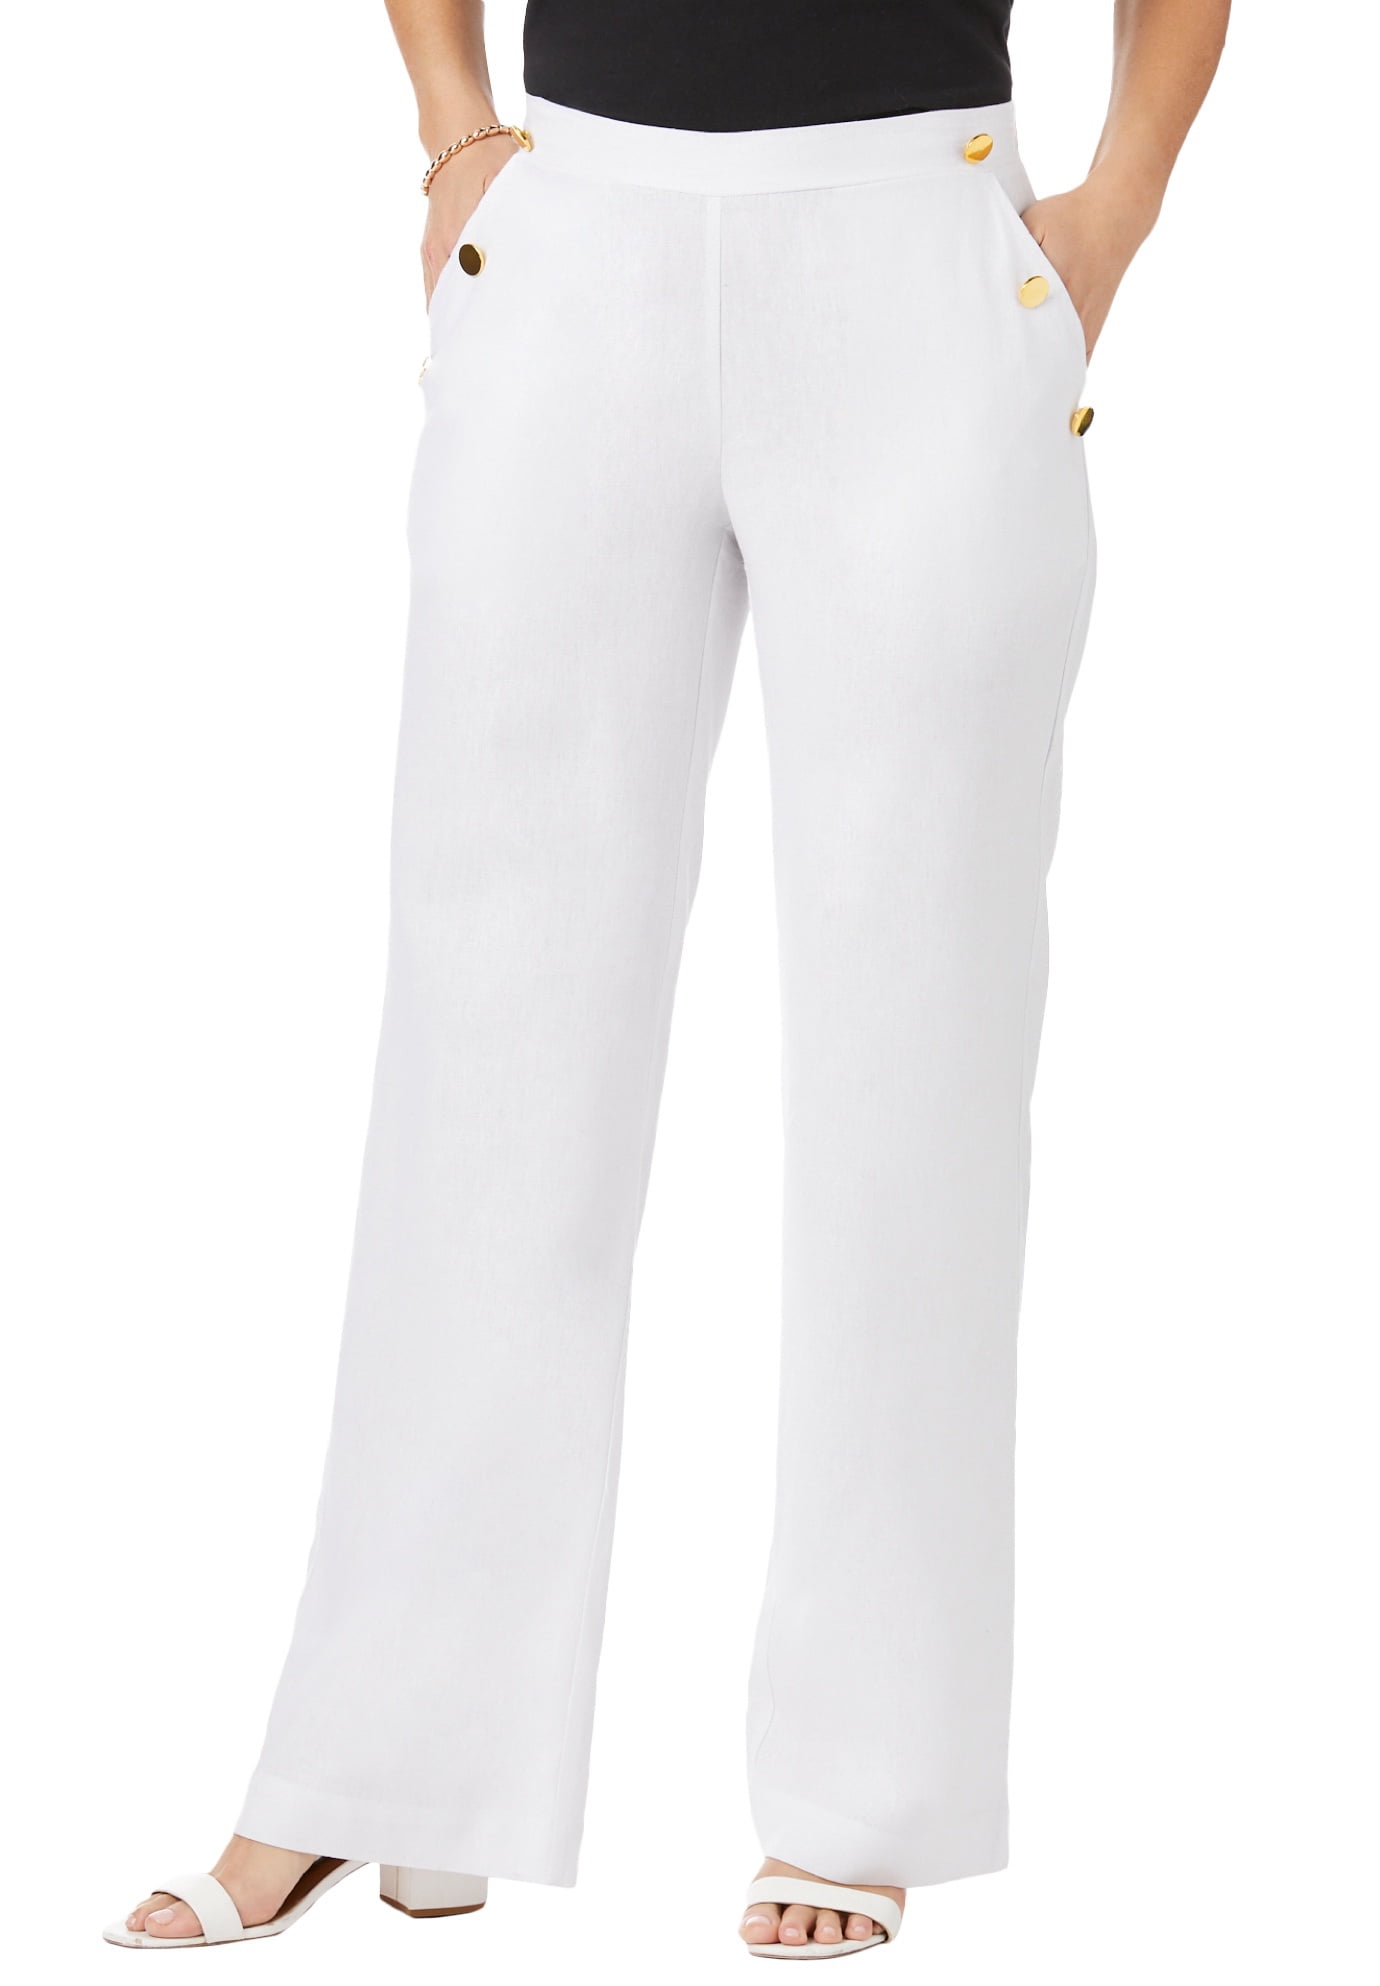 ASKK NY HighRise WideLeg Sailor Pants  Anthropologie Singapore  Womens  Clothing Accessories  Home